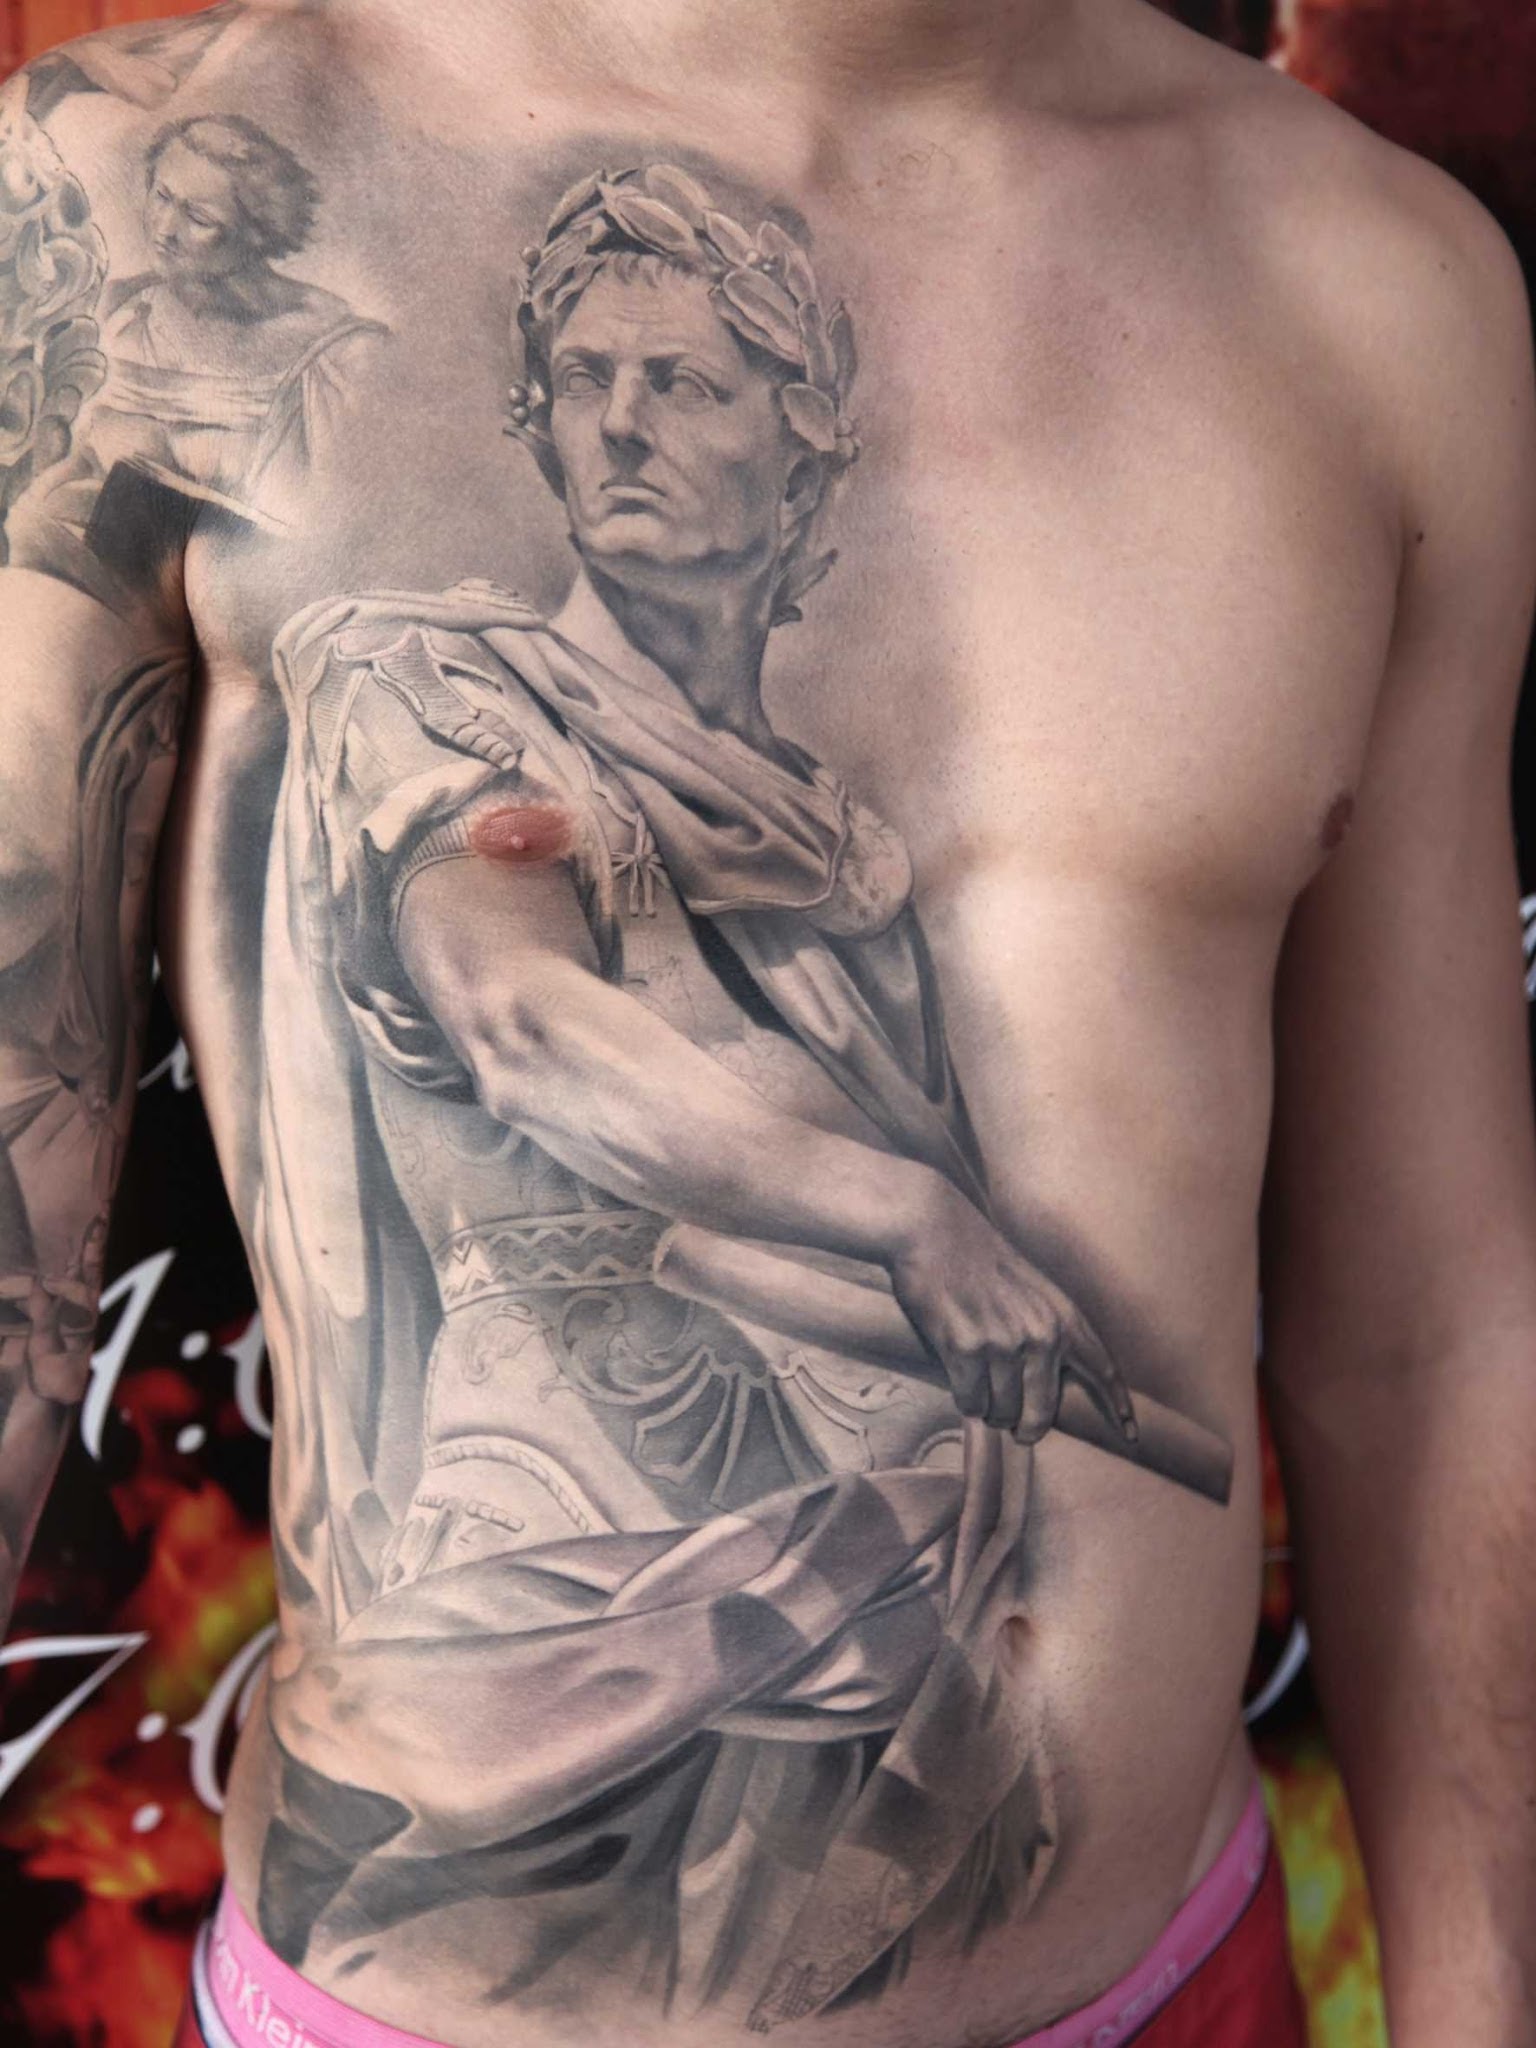 The sadistic Roman Emperor Caligula amused himself by capriciously ordering members of his court to be tattooed.